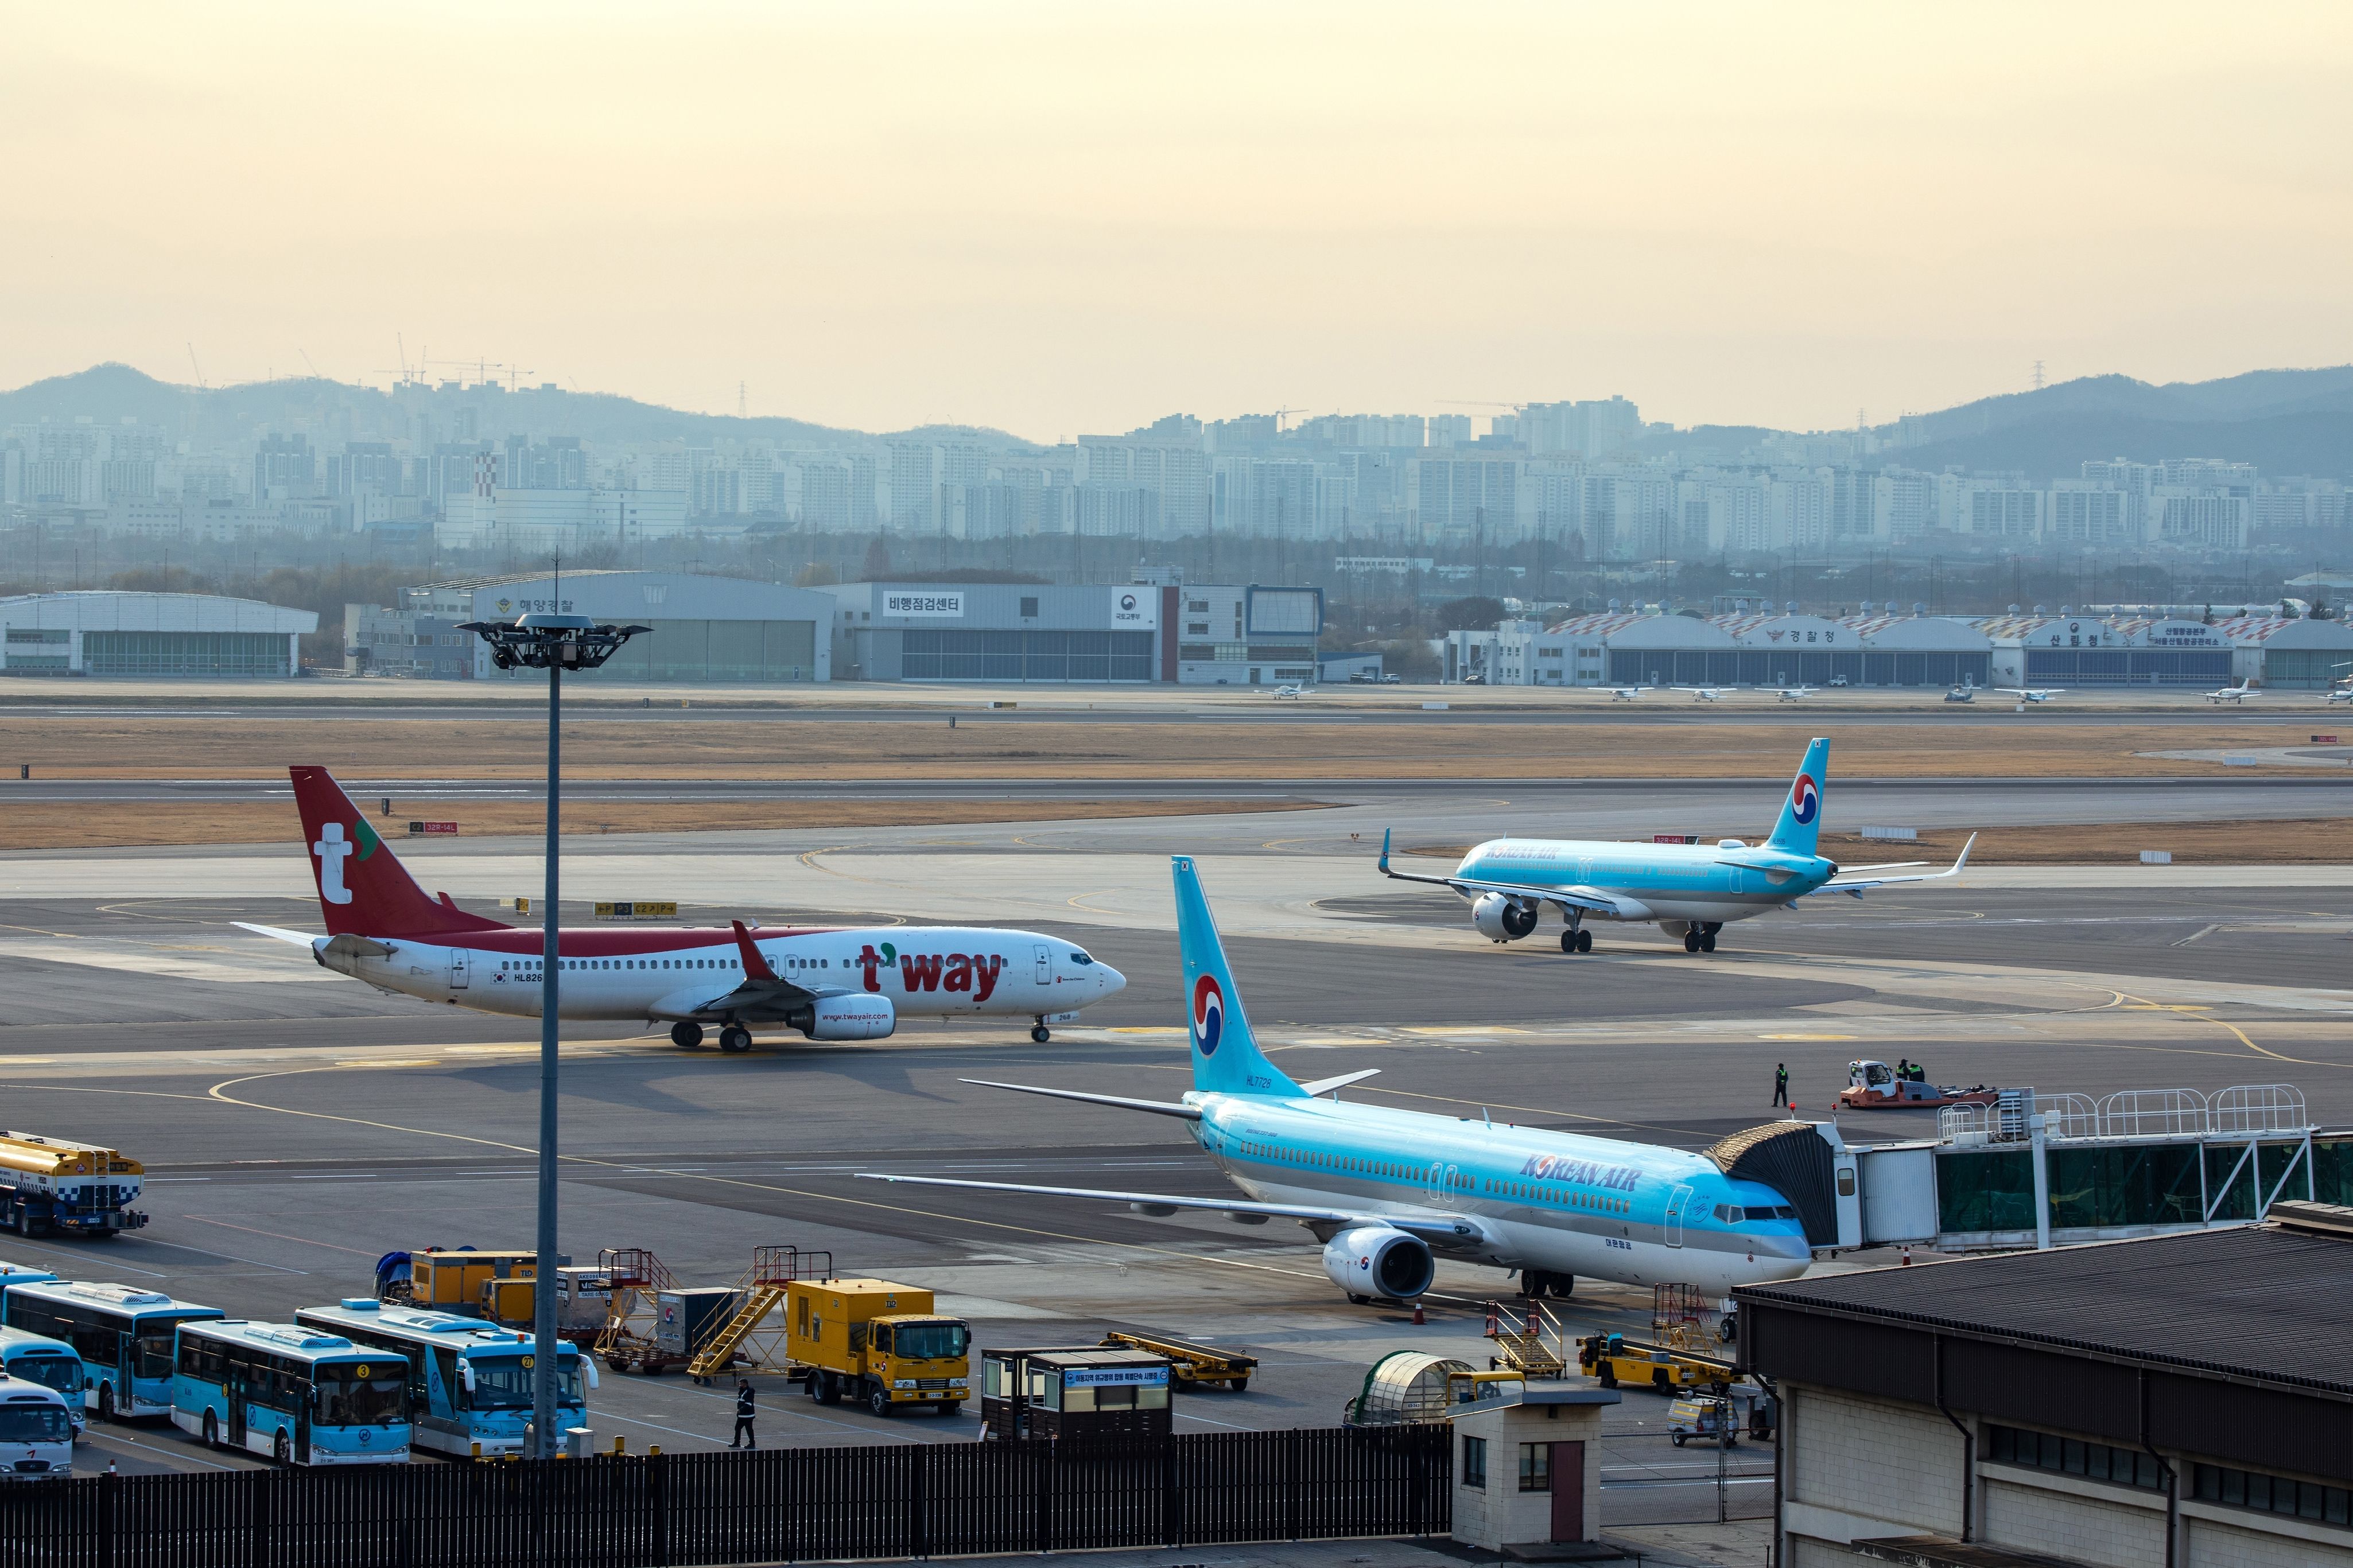 Korean Air and T'way Boeing 737-800 aircraft on the apron at Seoul Gimpo International Airport.